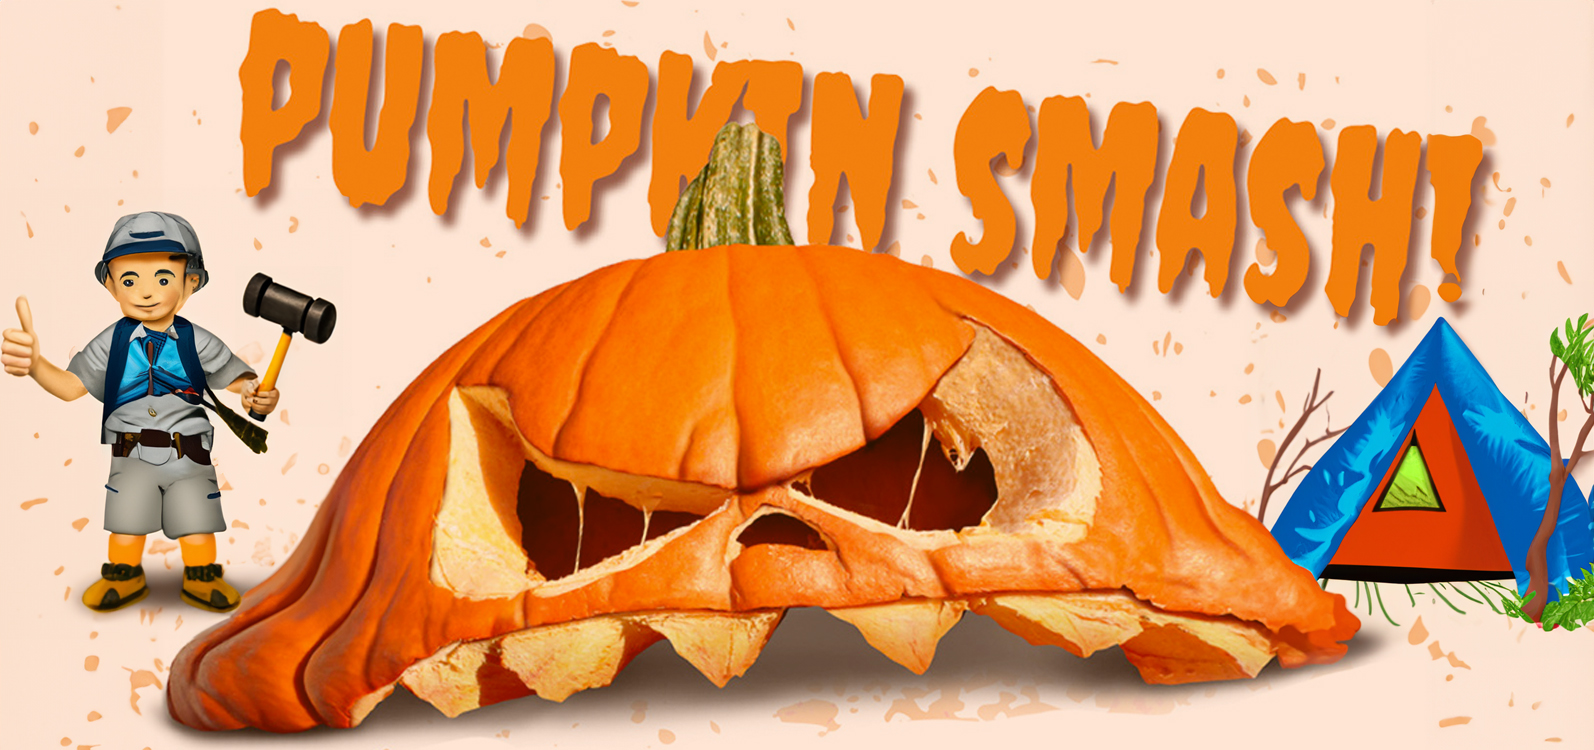 How many pumpkins does it take to be smashing?